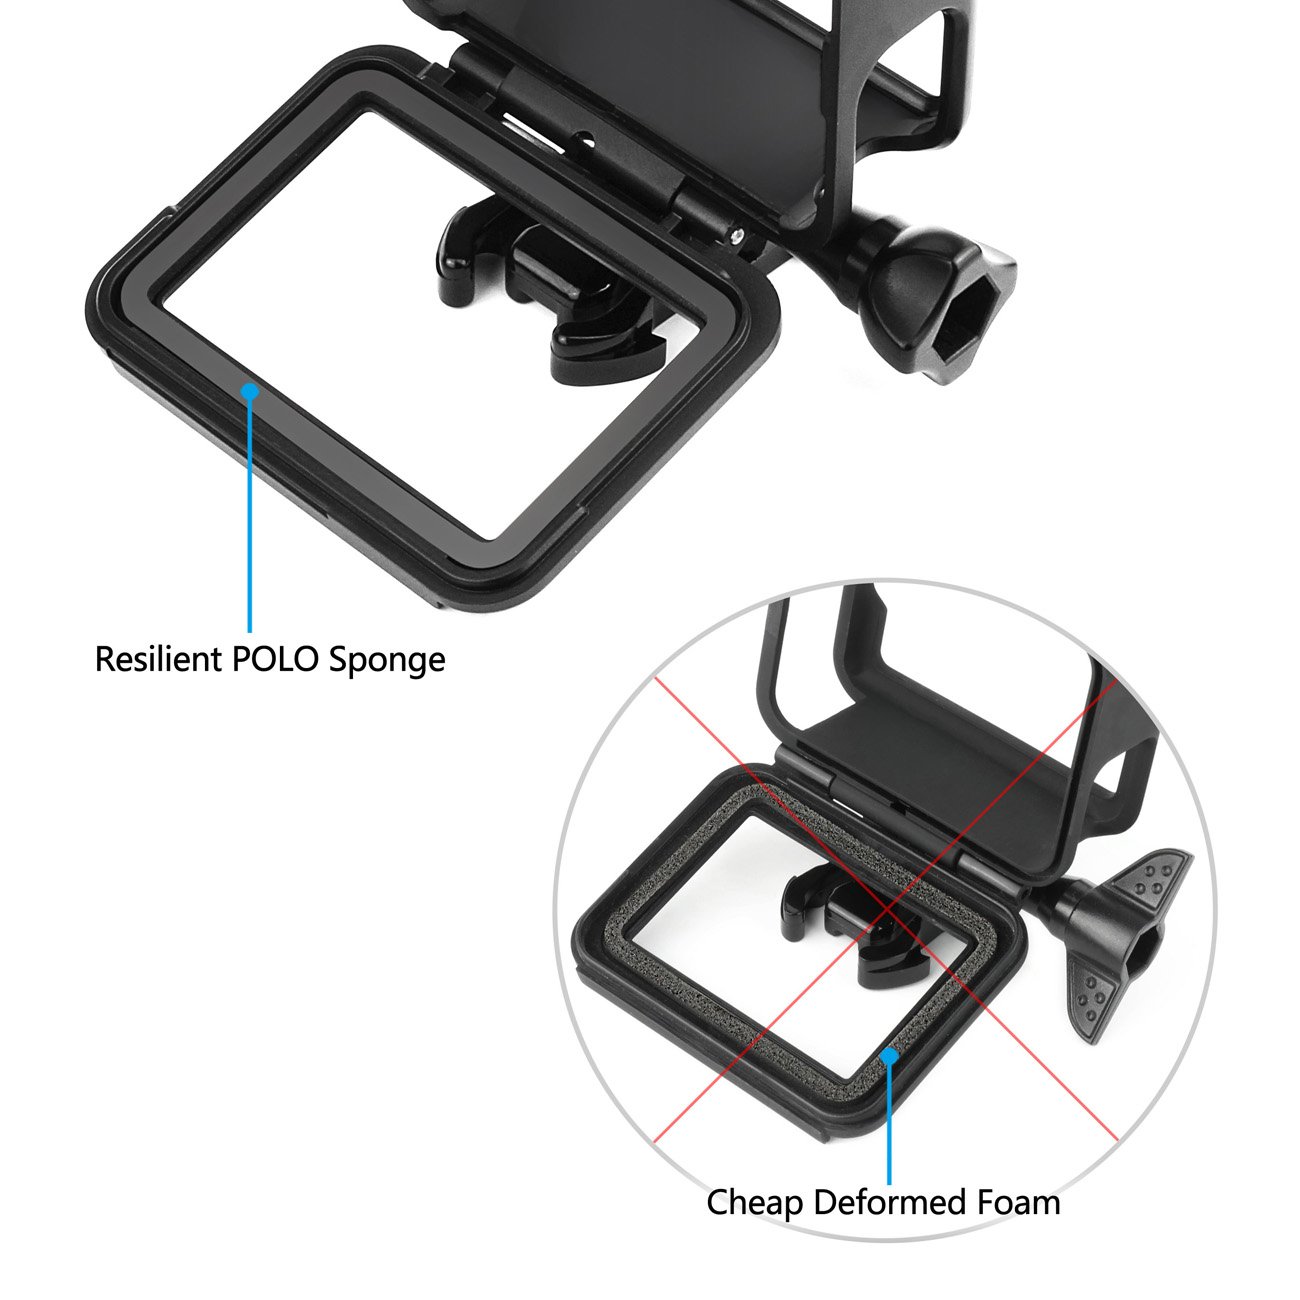 Frame Mount Housing Case for GoPro Hero 5/6/7 Black Action Camera - Protective Case with Quick Release Buckle, Long Thumb Bolt Screw, and Lens Cap - Black